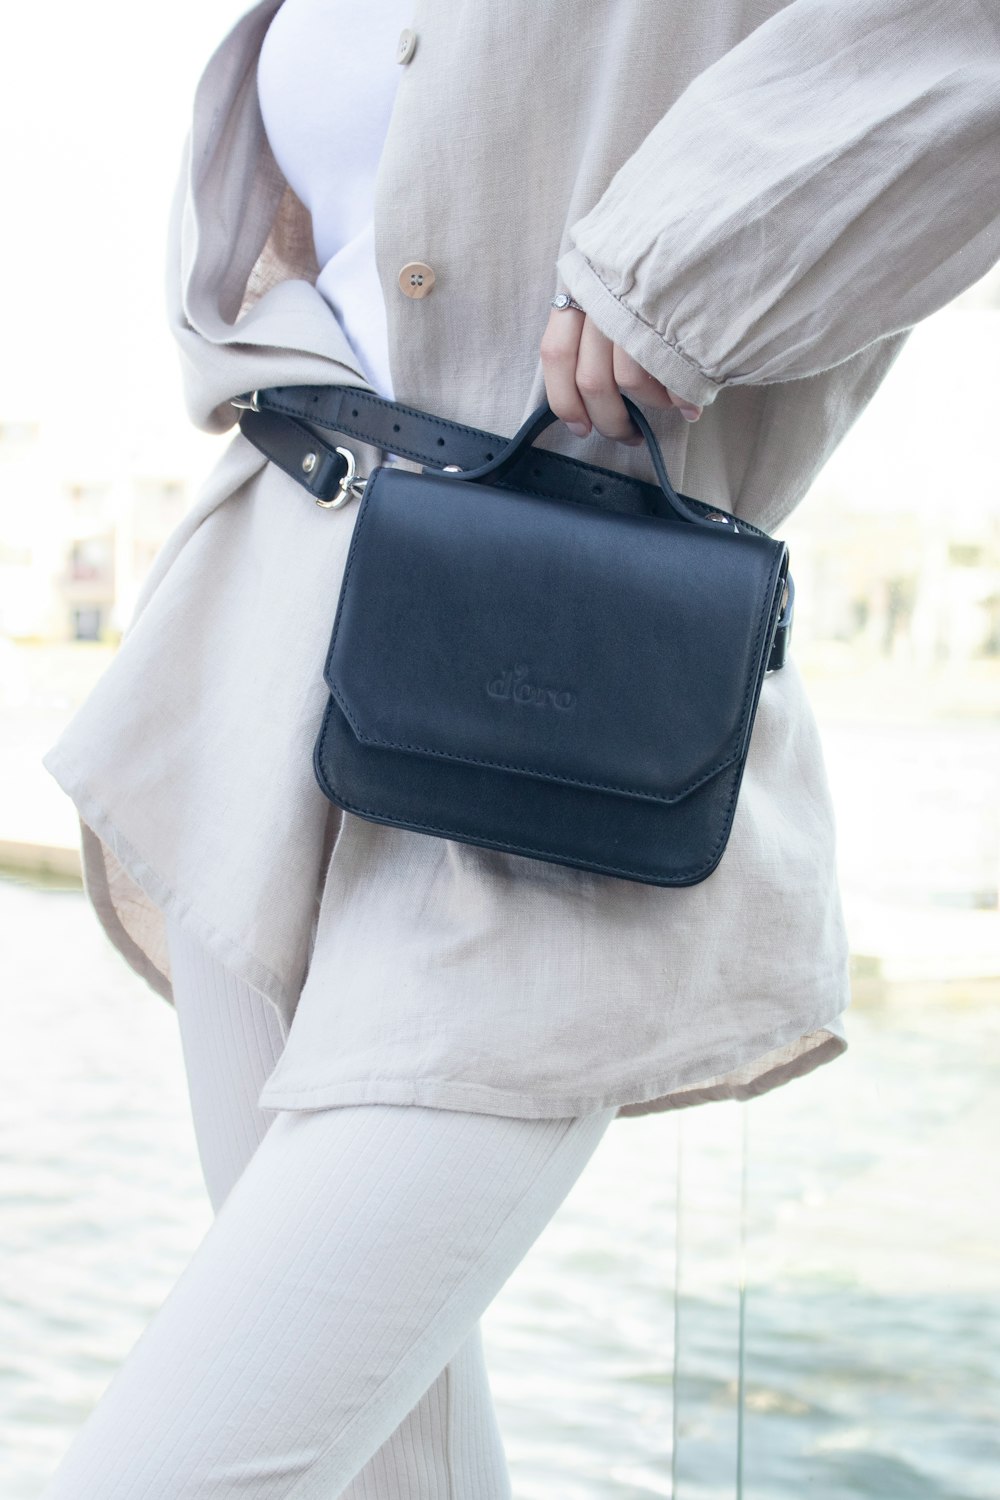 person in white coat carrying black leather sling bag